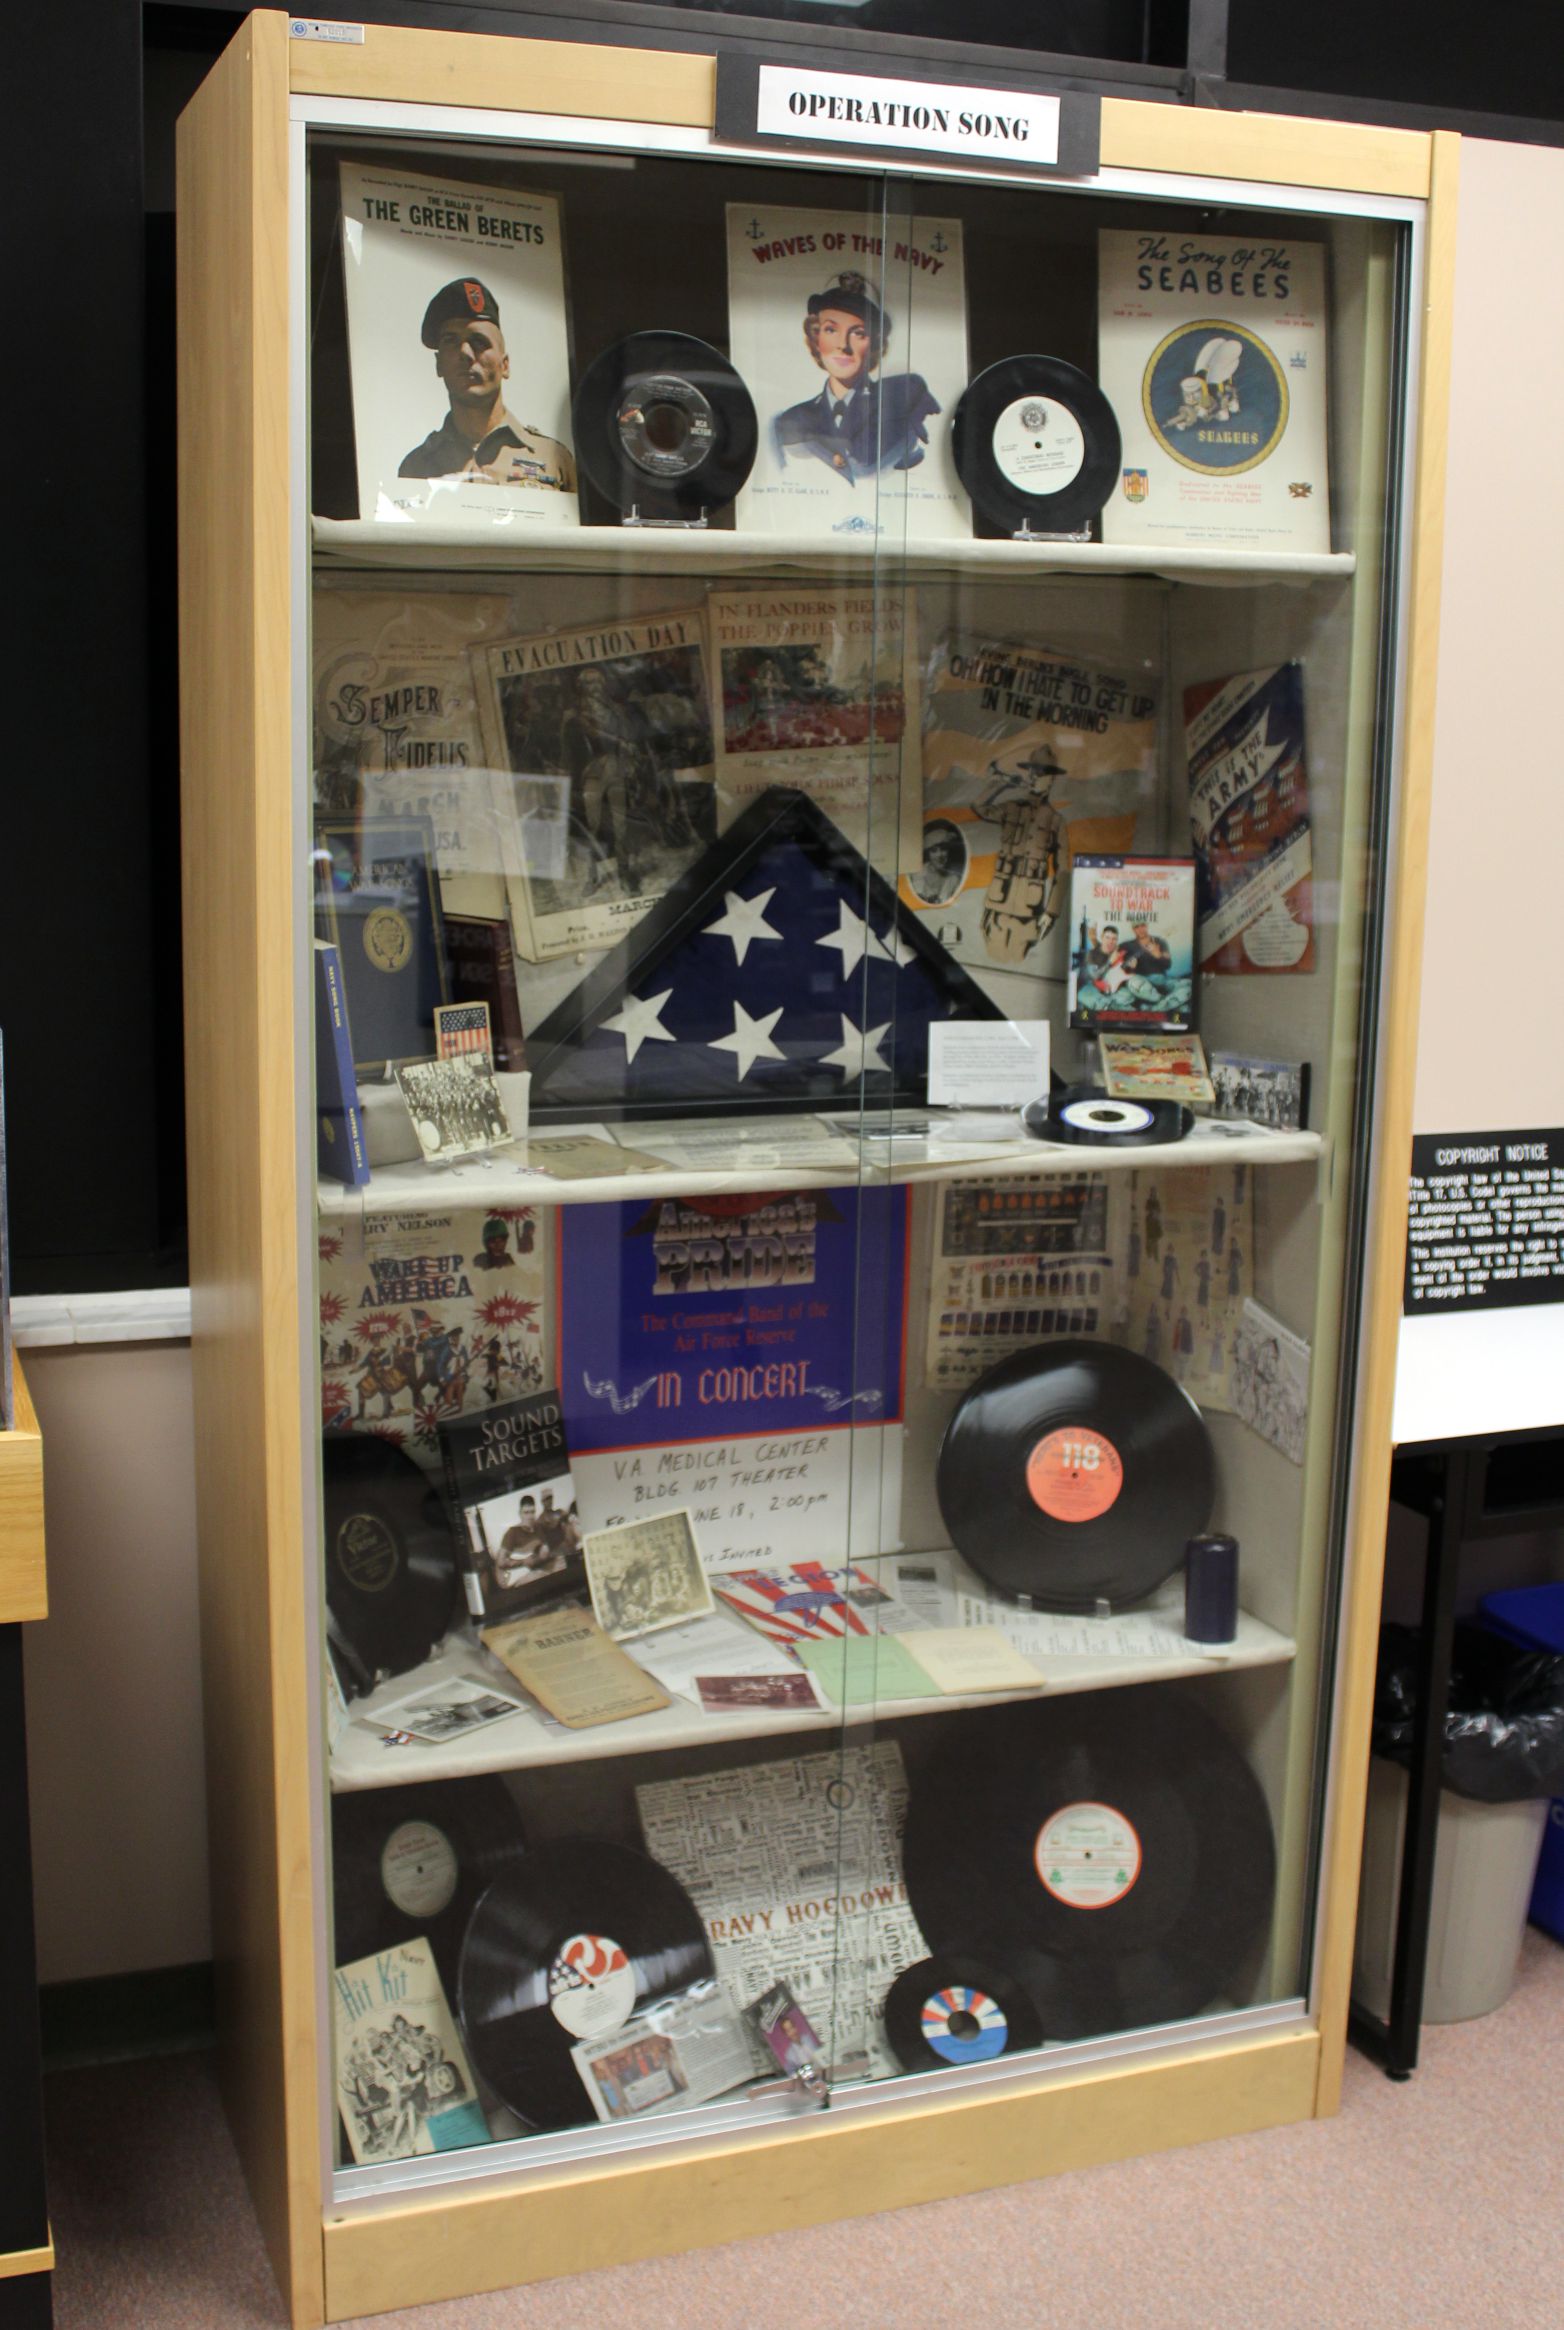 Operation Song Exhibit